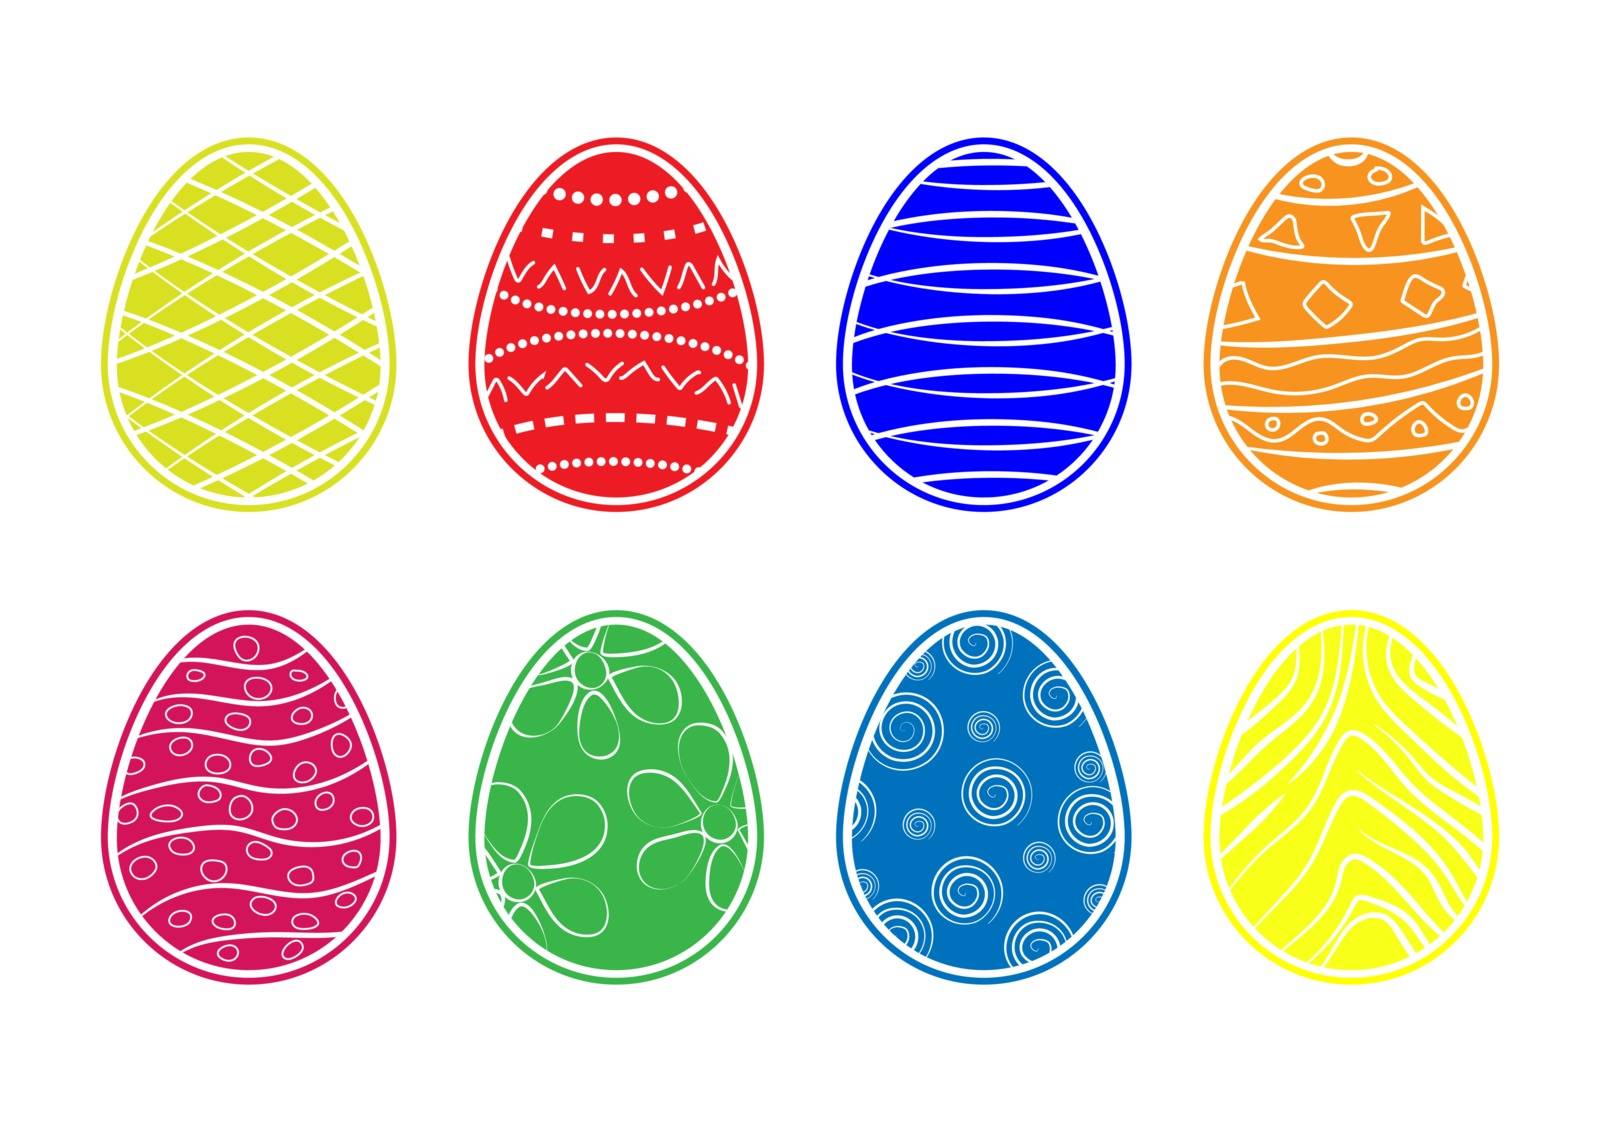 Simple pattern of colored Easter eggs, simple design by Grommik